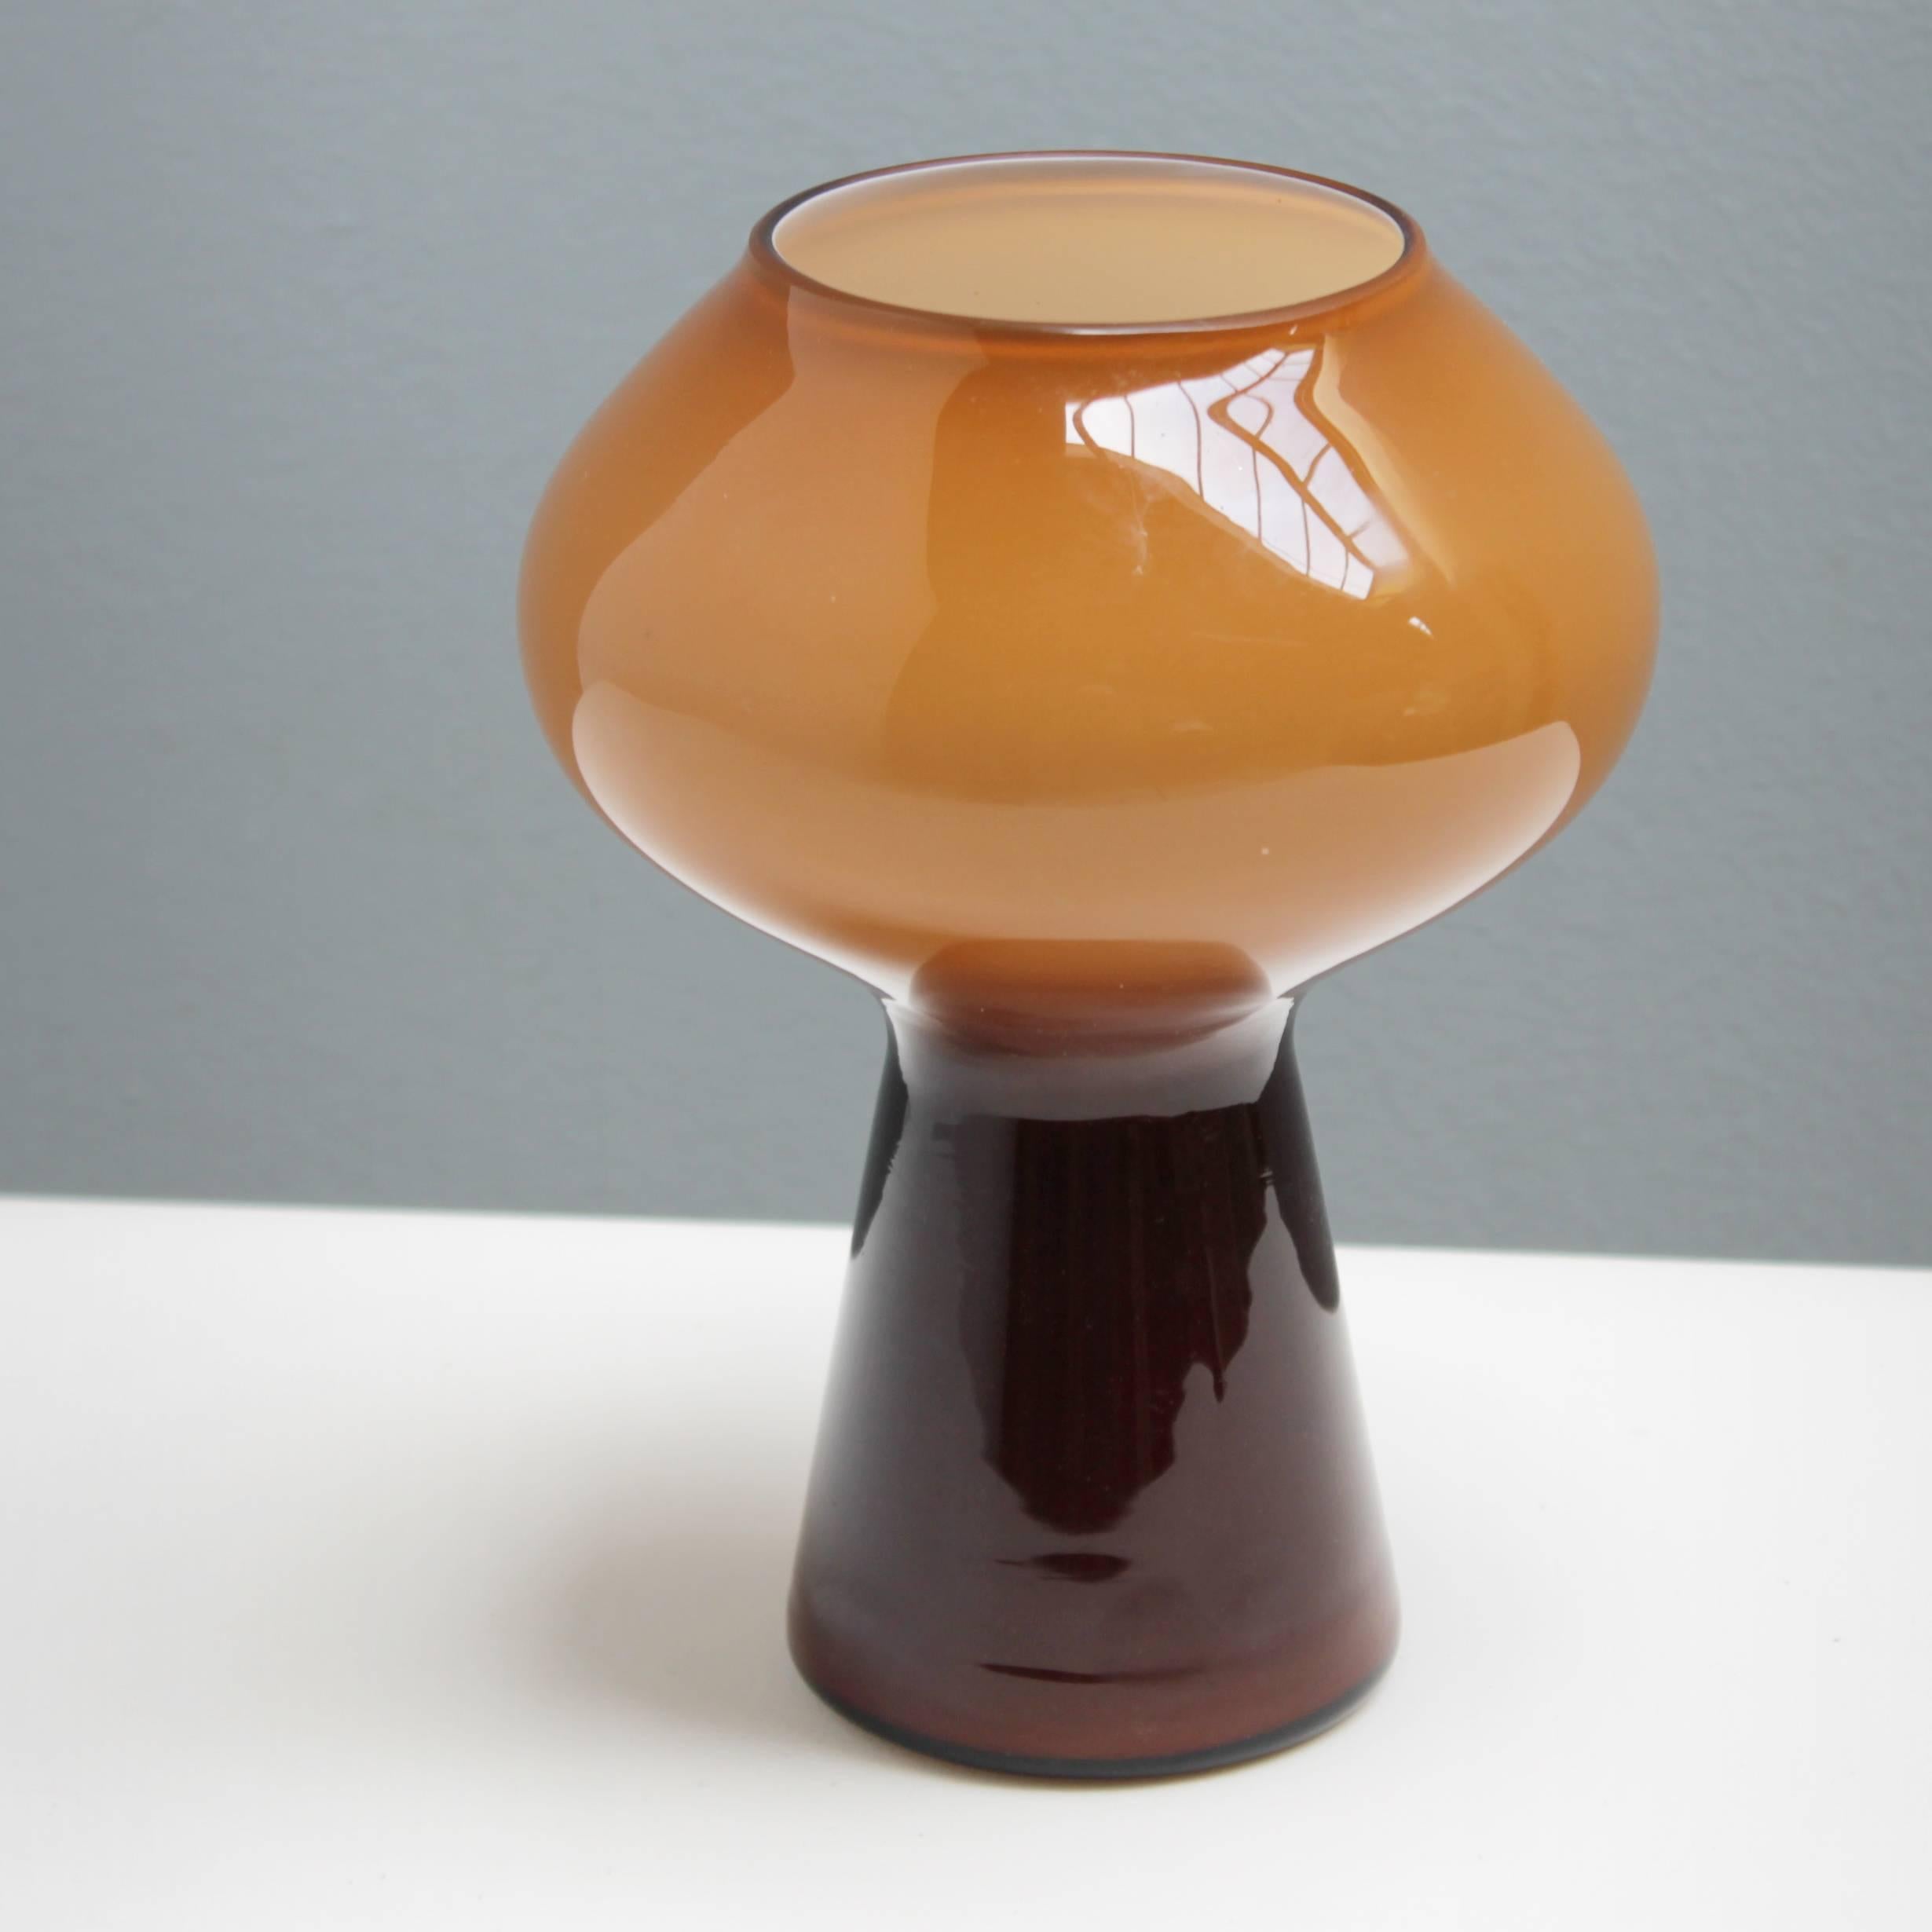 The ‘Fungo’ or Zaffiro 4000 table lamp by Massimo Vignelli for Venini, Italy 1950s.
This is the small version, dimensions: height 7.9 in. (20 cm), diameter 5.5 inches (14 cm). Handblown Murano glass. We can also offer you a large white 'Fungo'